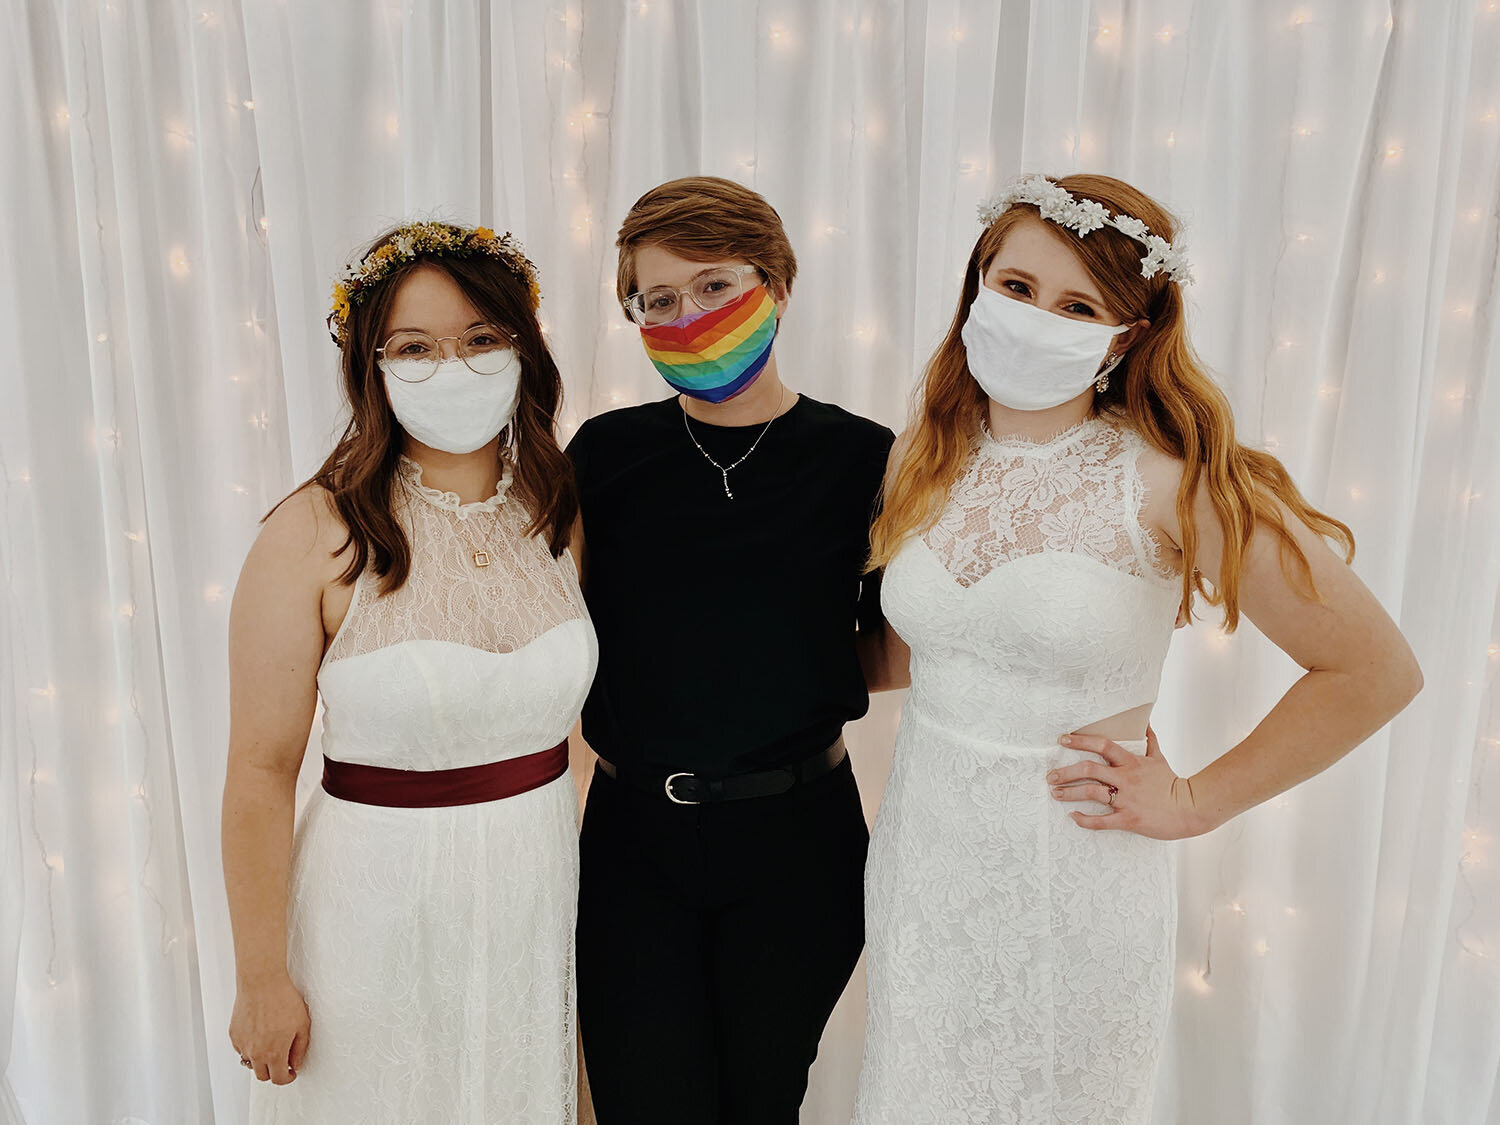 A Virginia wedding photographer stands between a queer couple for a photo on their wedding day in South Carolina.